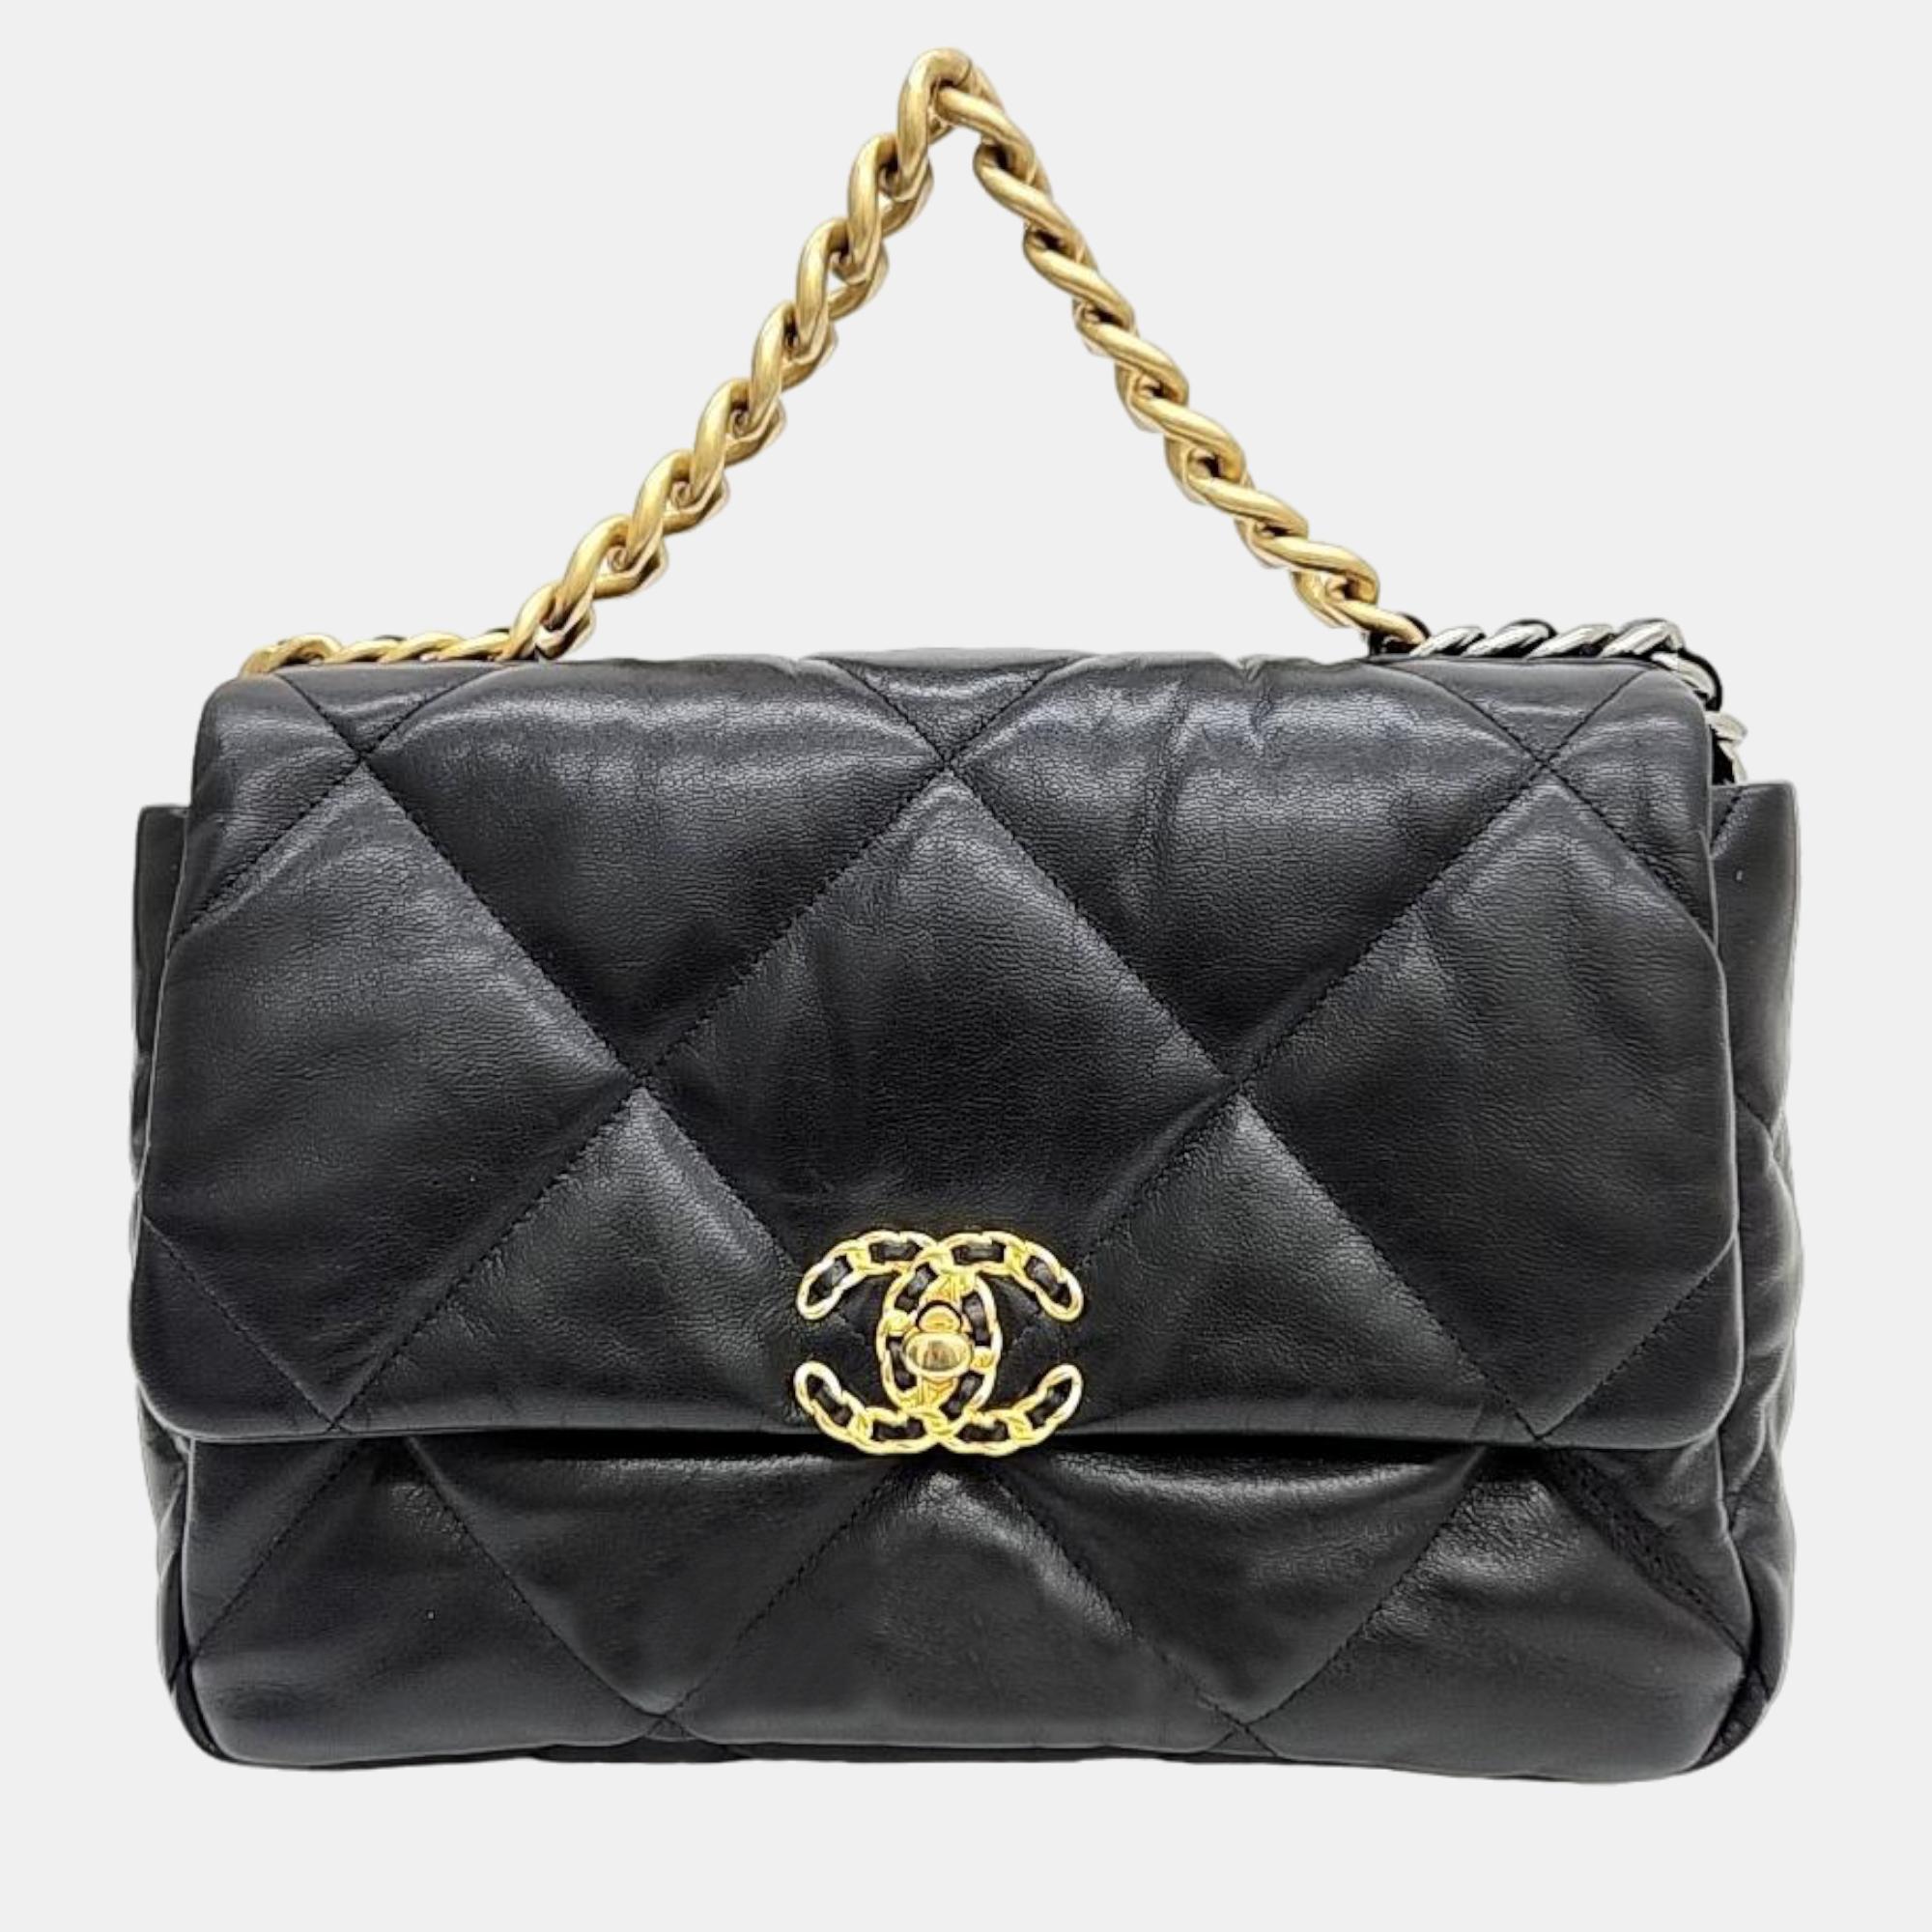 Stunning Chanel 19 Shoulder Bag in Green Quilted Leather , Matt Gold and SHW